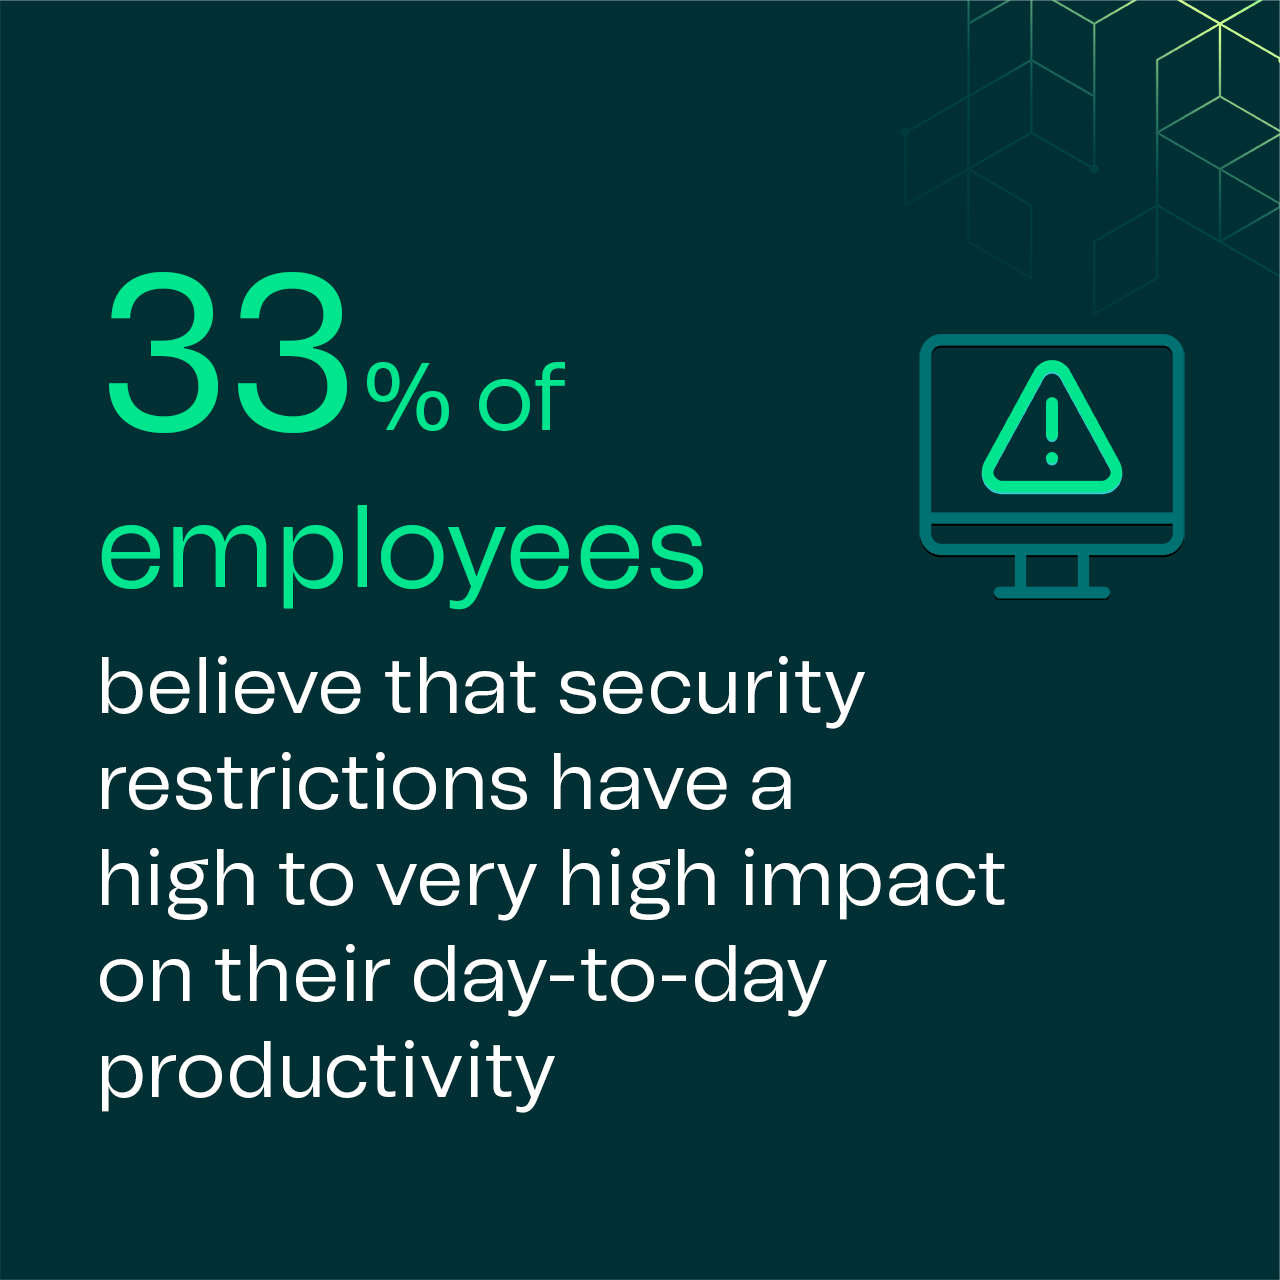 33% of employees believe that security restrictions have a high to very high impact on their day-to-day productivity